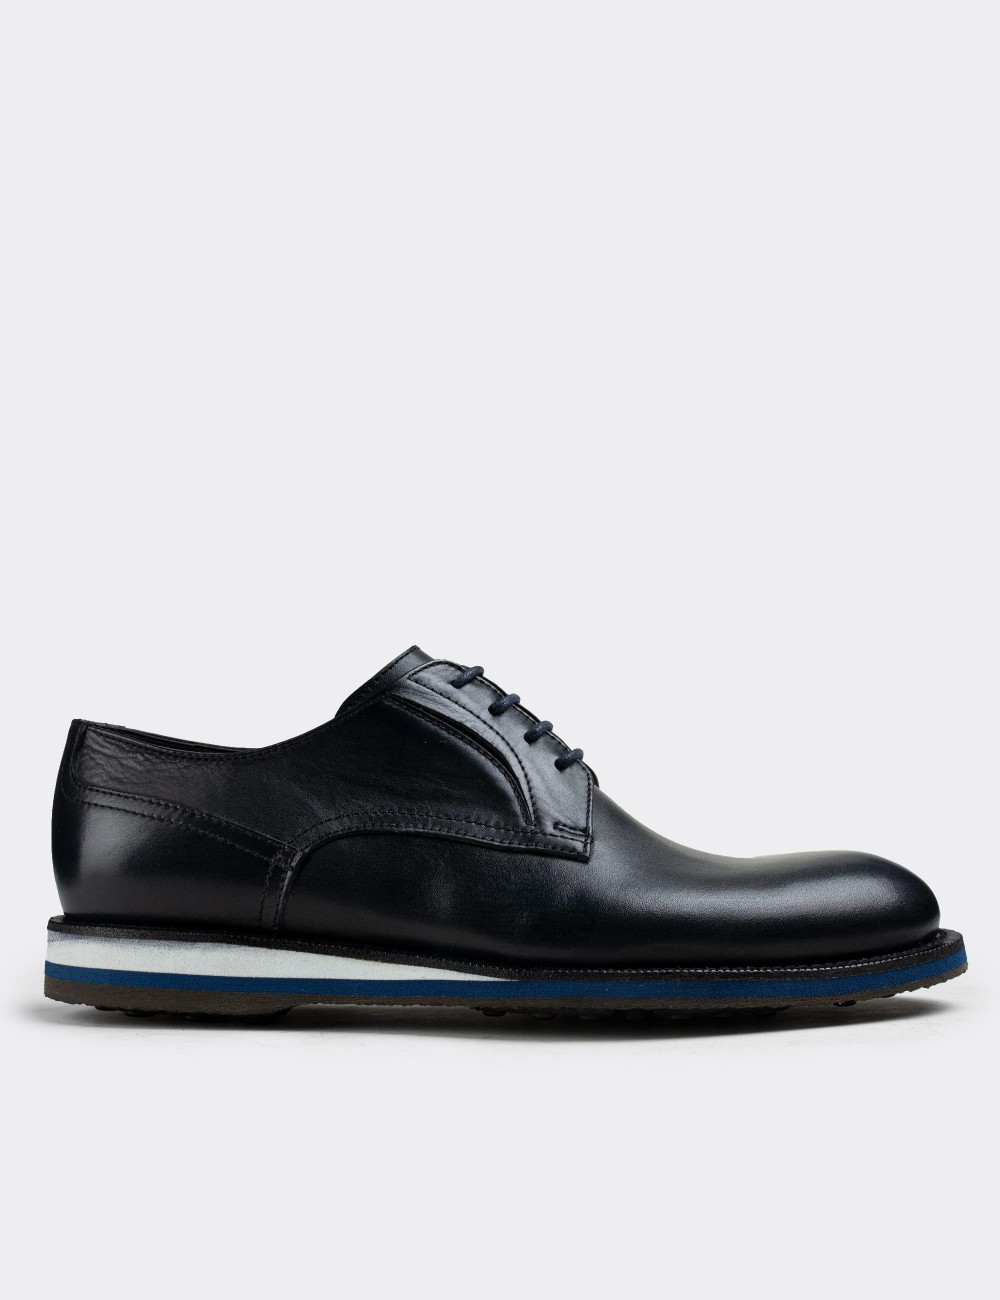 Navy  Leather Lace-up Shoes - 01294MLCVE20